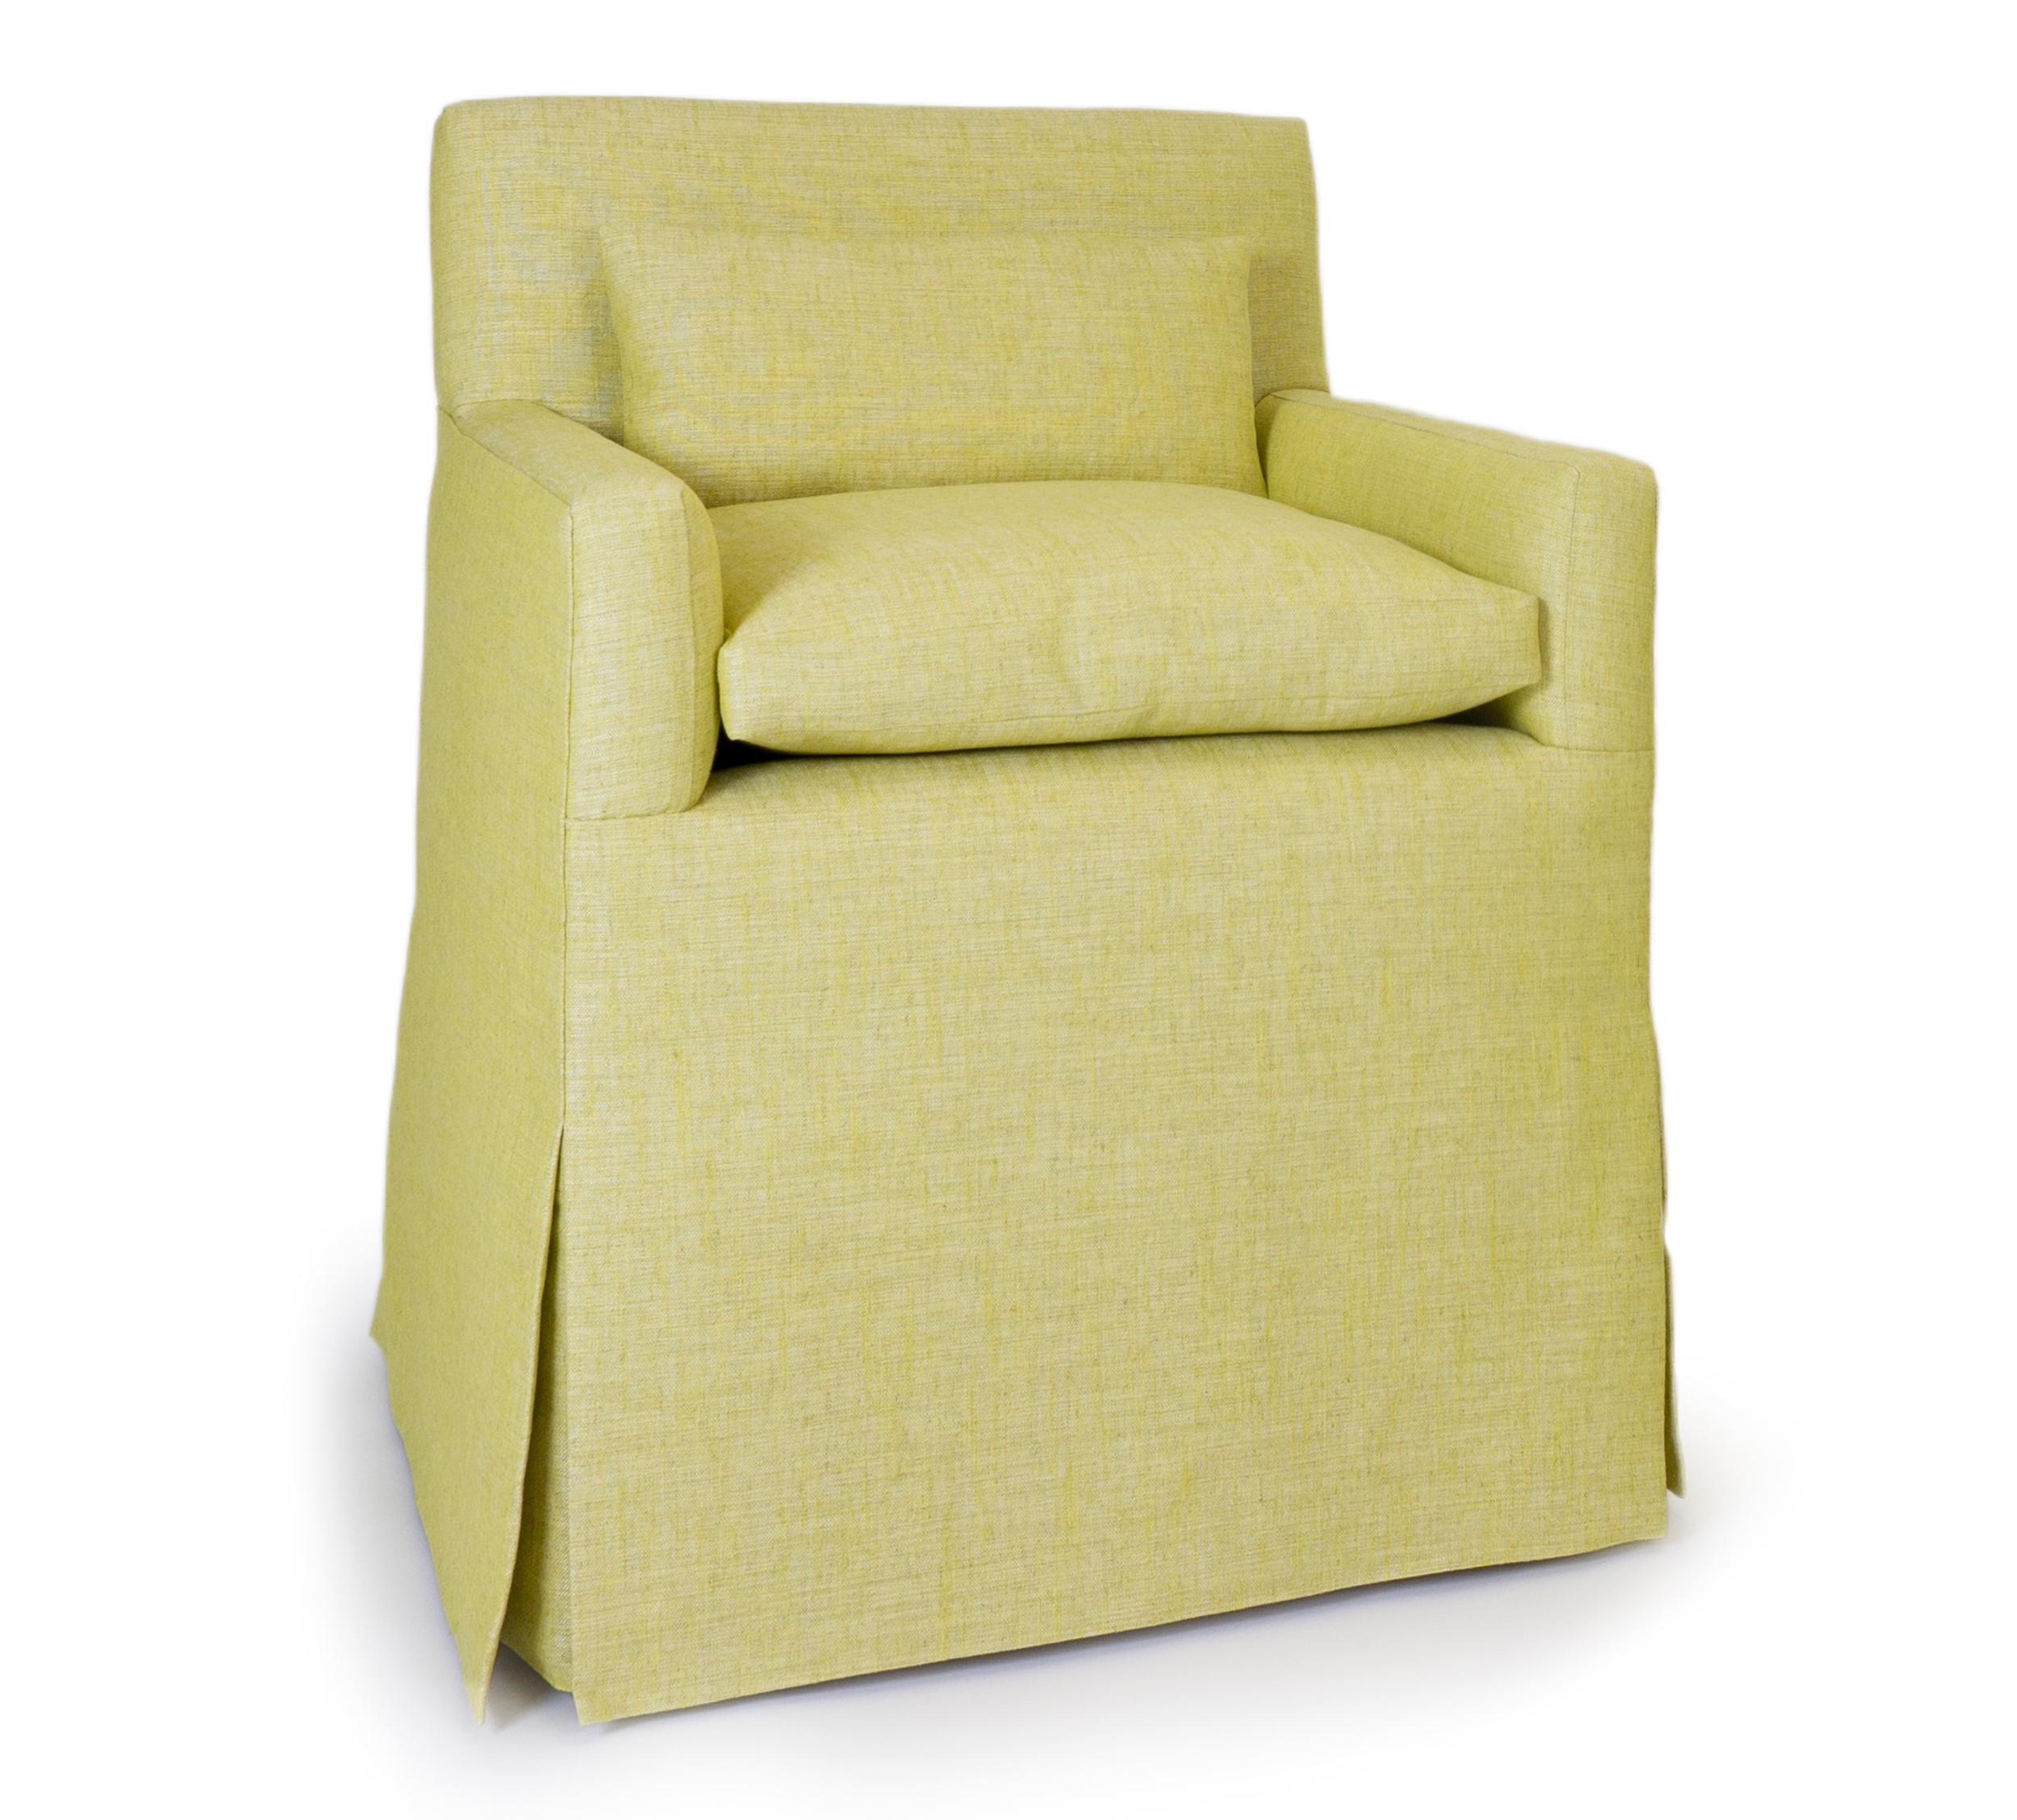 The chairs shown feature a skirt with neat pleated edges, a low back and loose seat cushion. It is upholstered in a yellow/green textured poly linen. The base sits atop casters. This piece is completely customizable by size and finish.